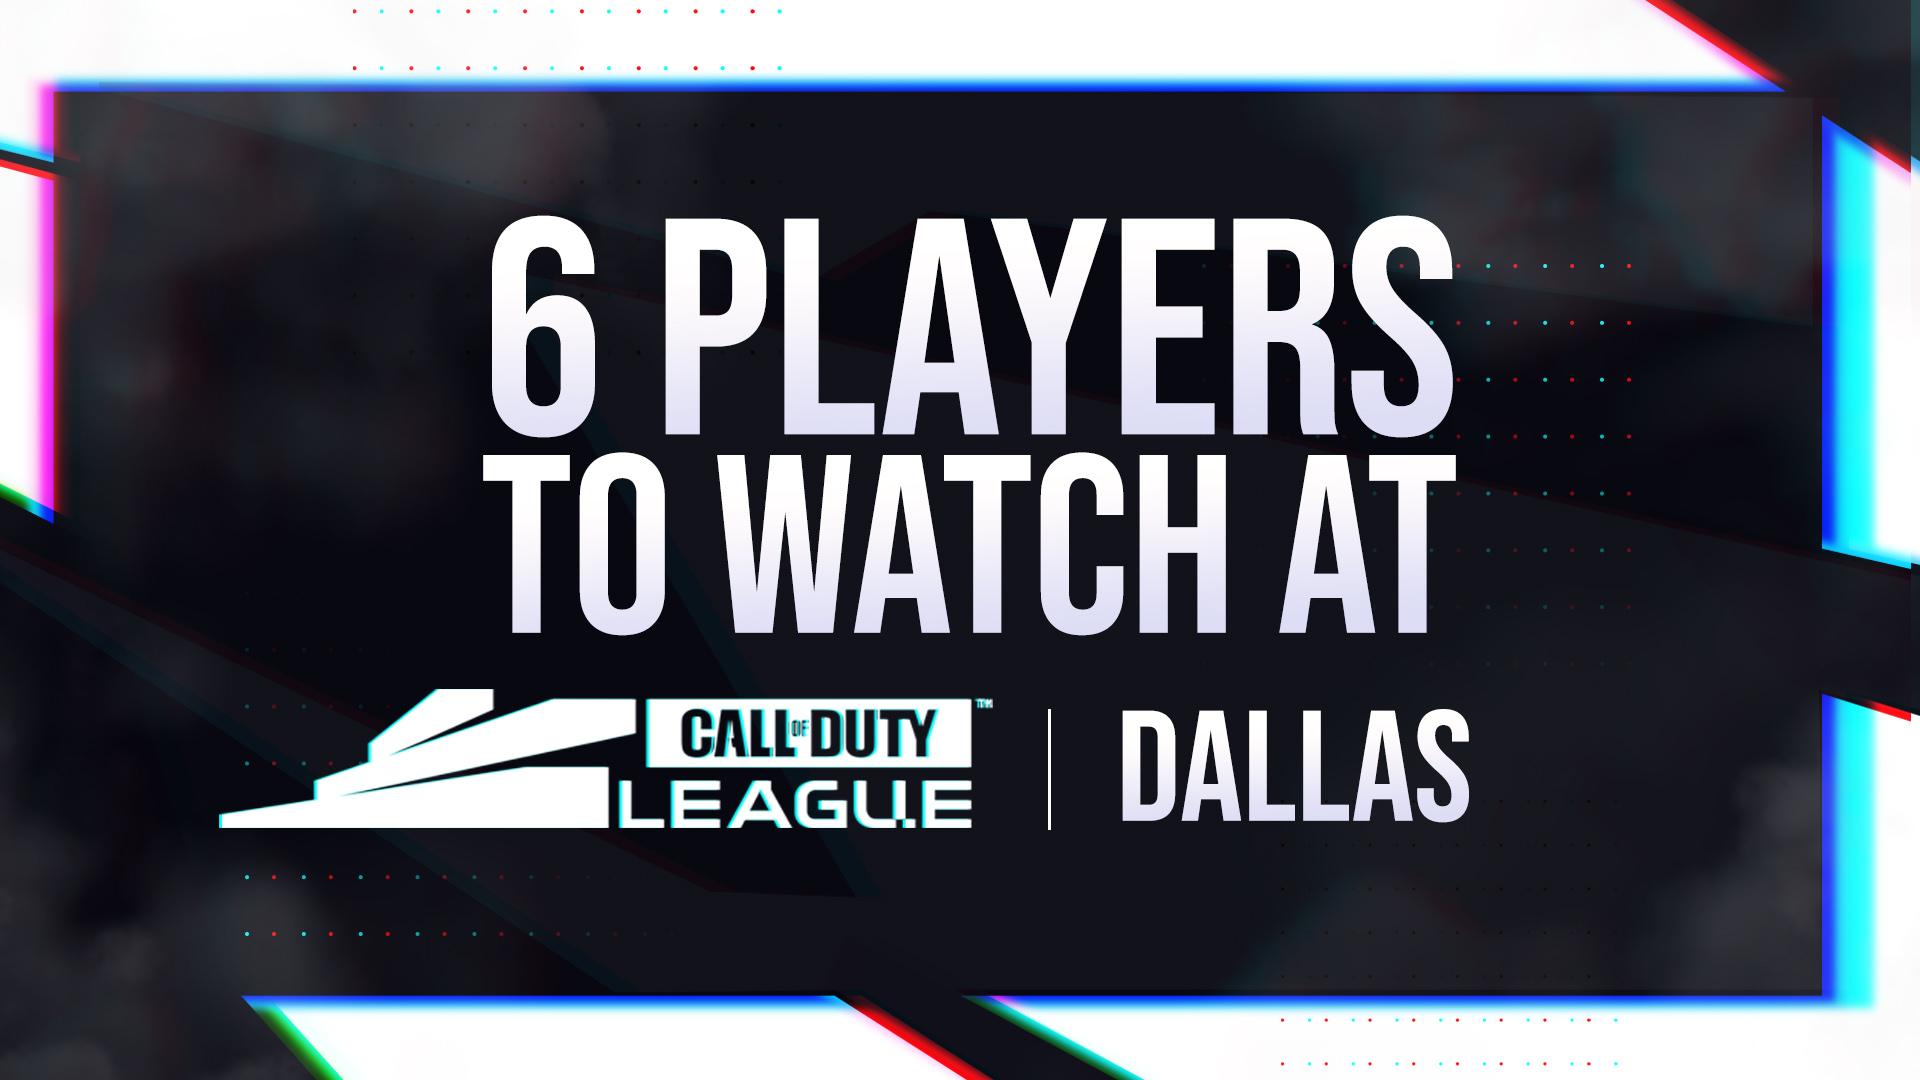 6 players to watch during CDL Dallas